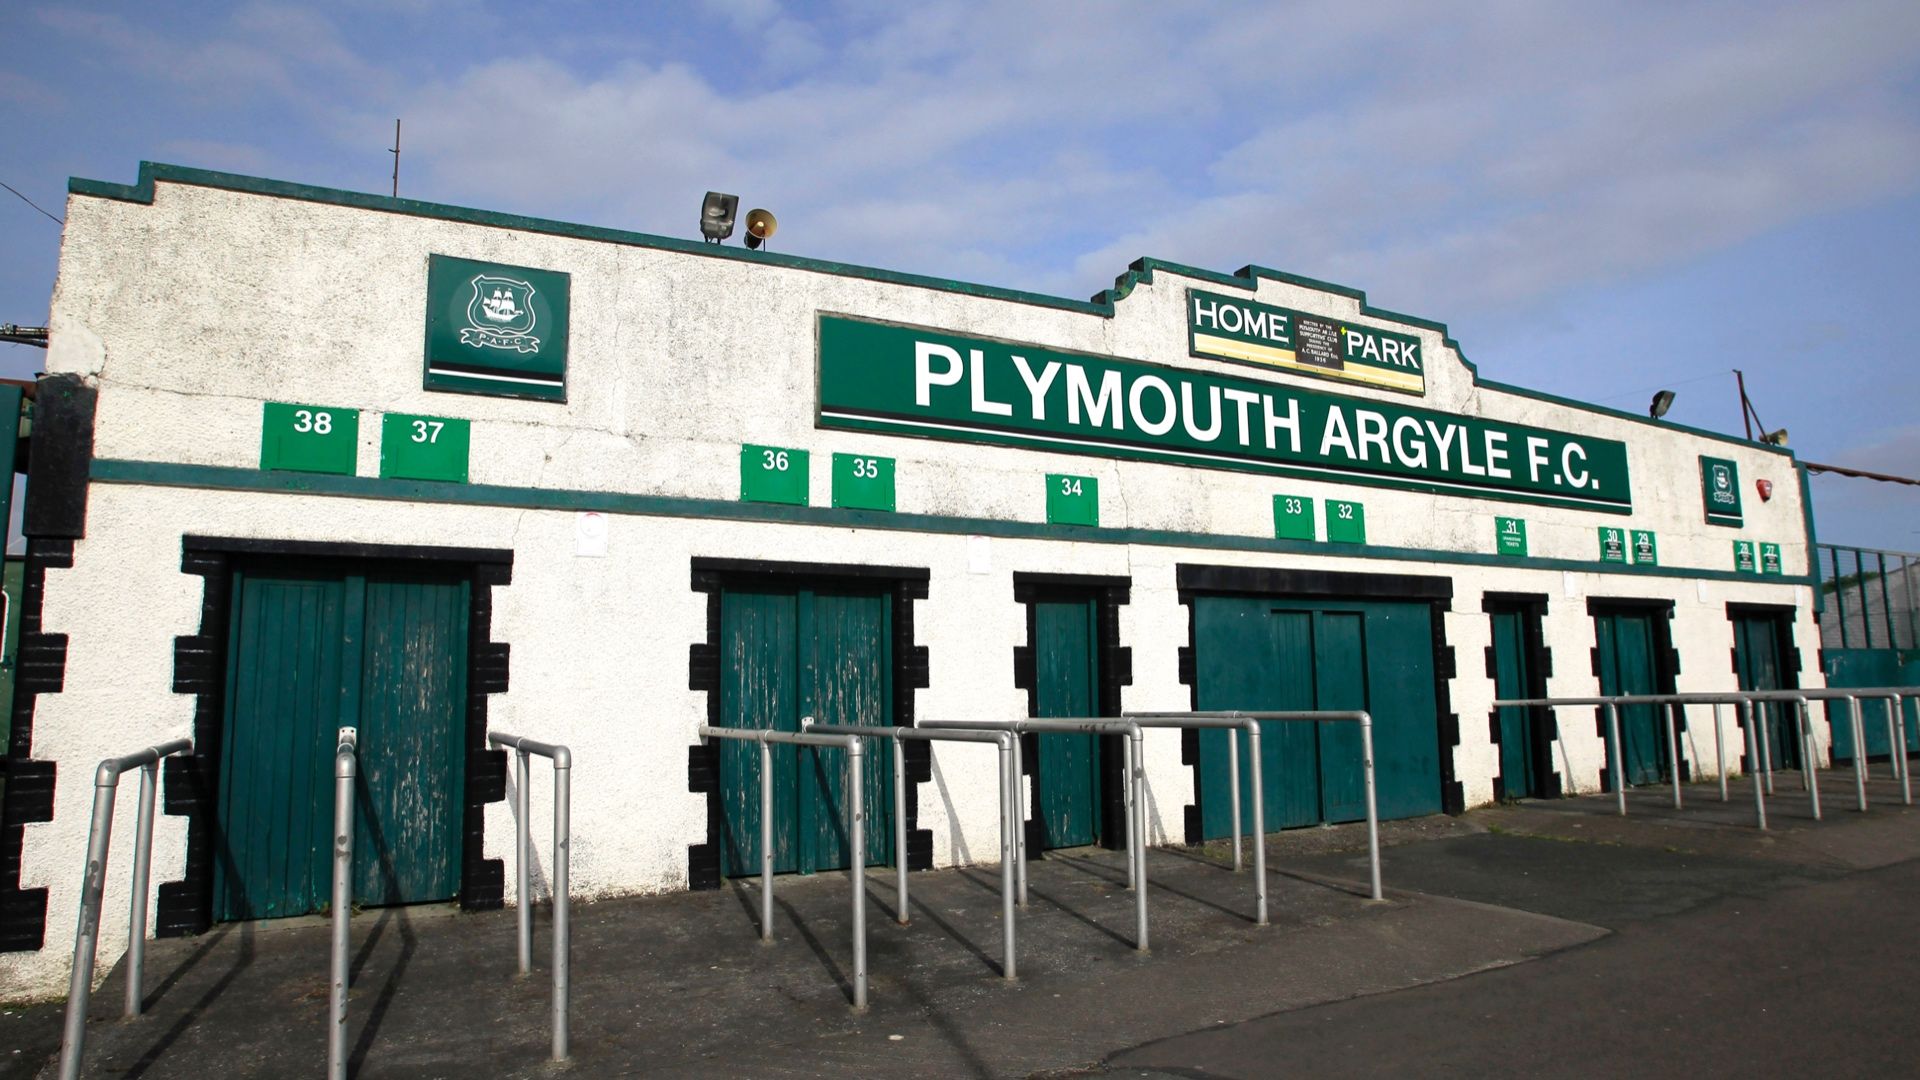 Home Park - Plymouth